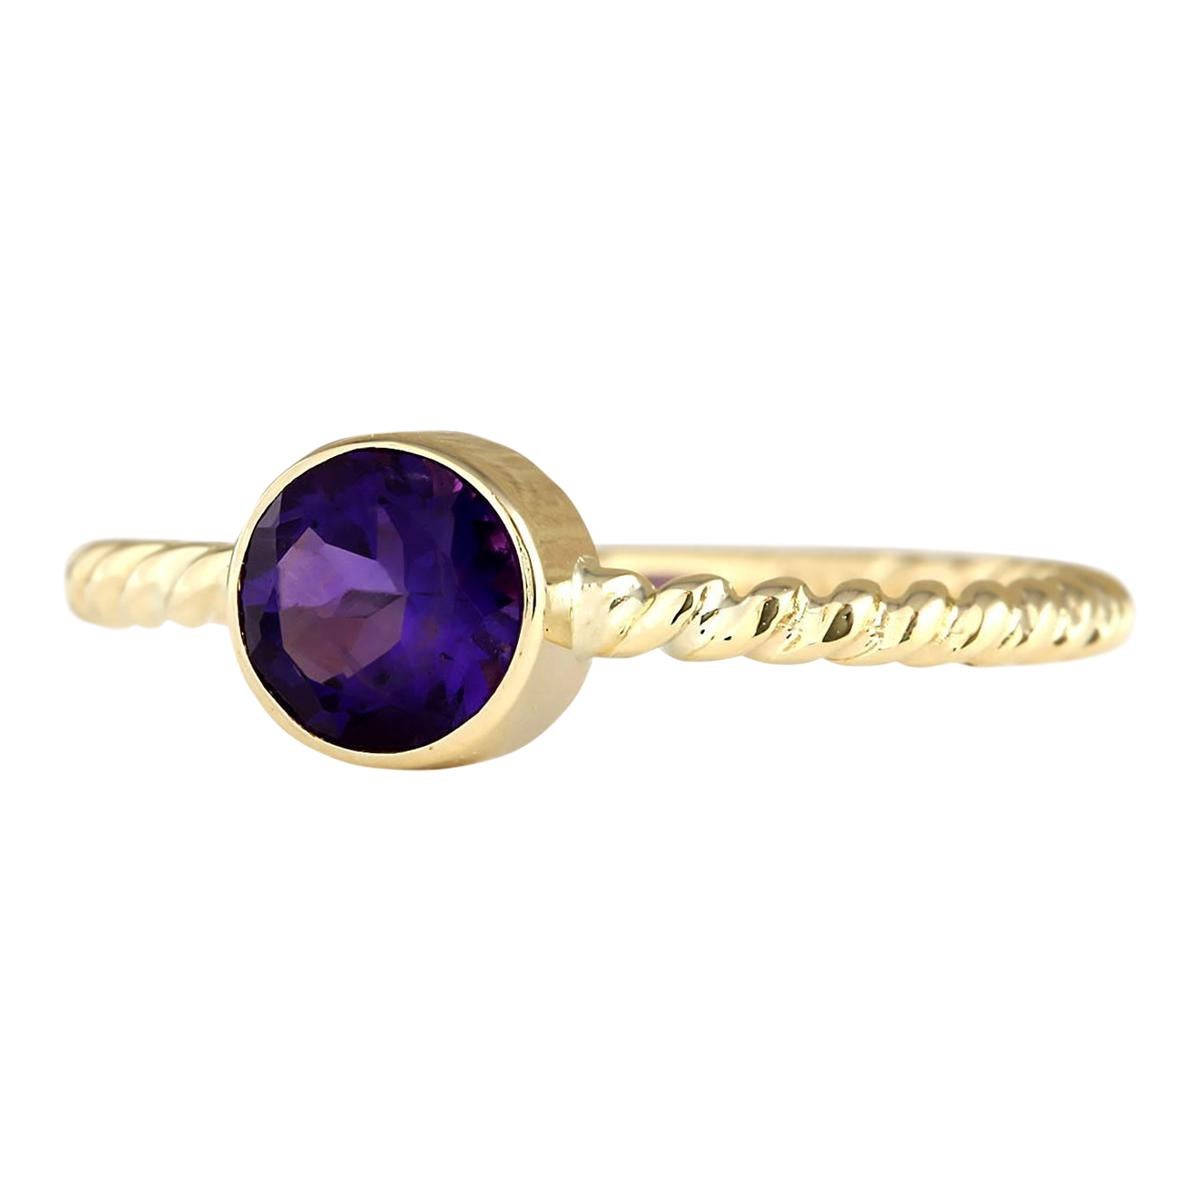 Stamped: 14K Yellow Gold
Total Ring Weight: 2.2 Grams
The total Natural Amethyst Weight is 1.00 Carat
Color: Purple
Face Measures: 6.00x6.00 mm
Sku: [703217W]